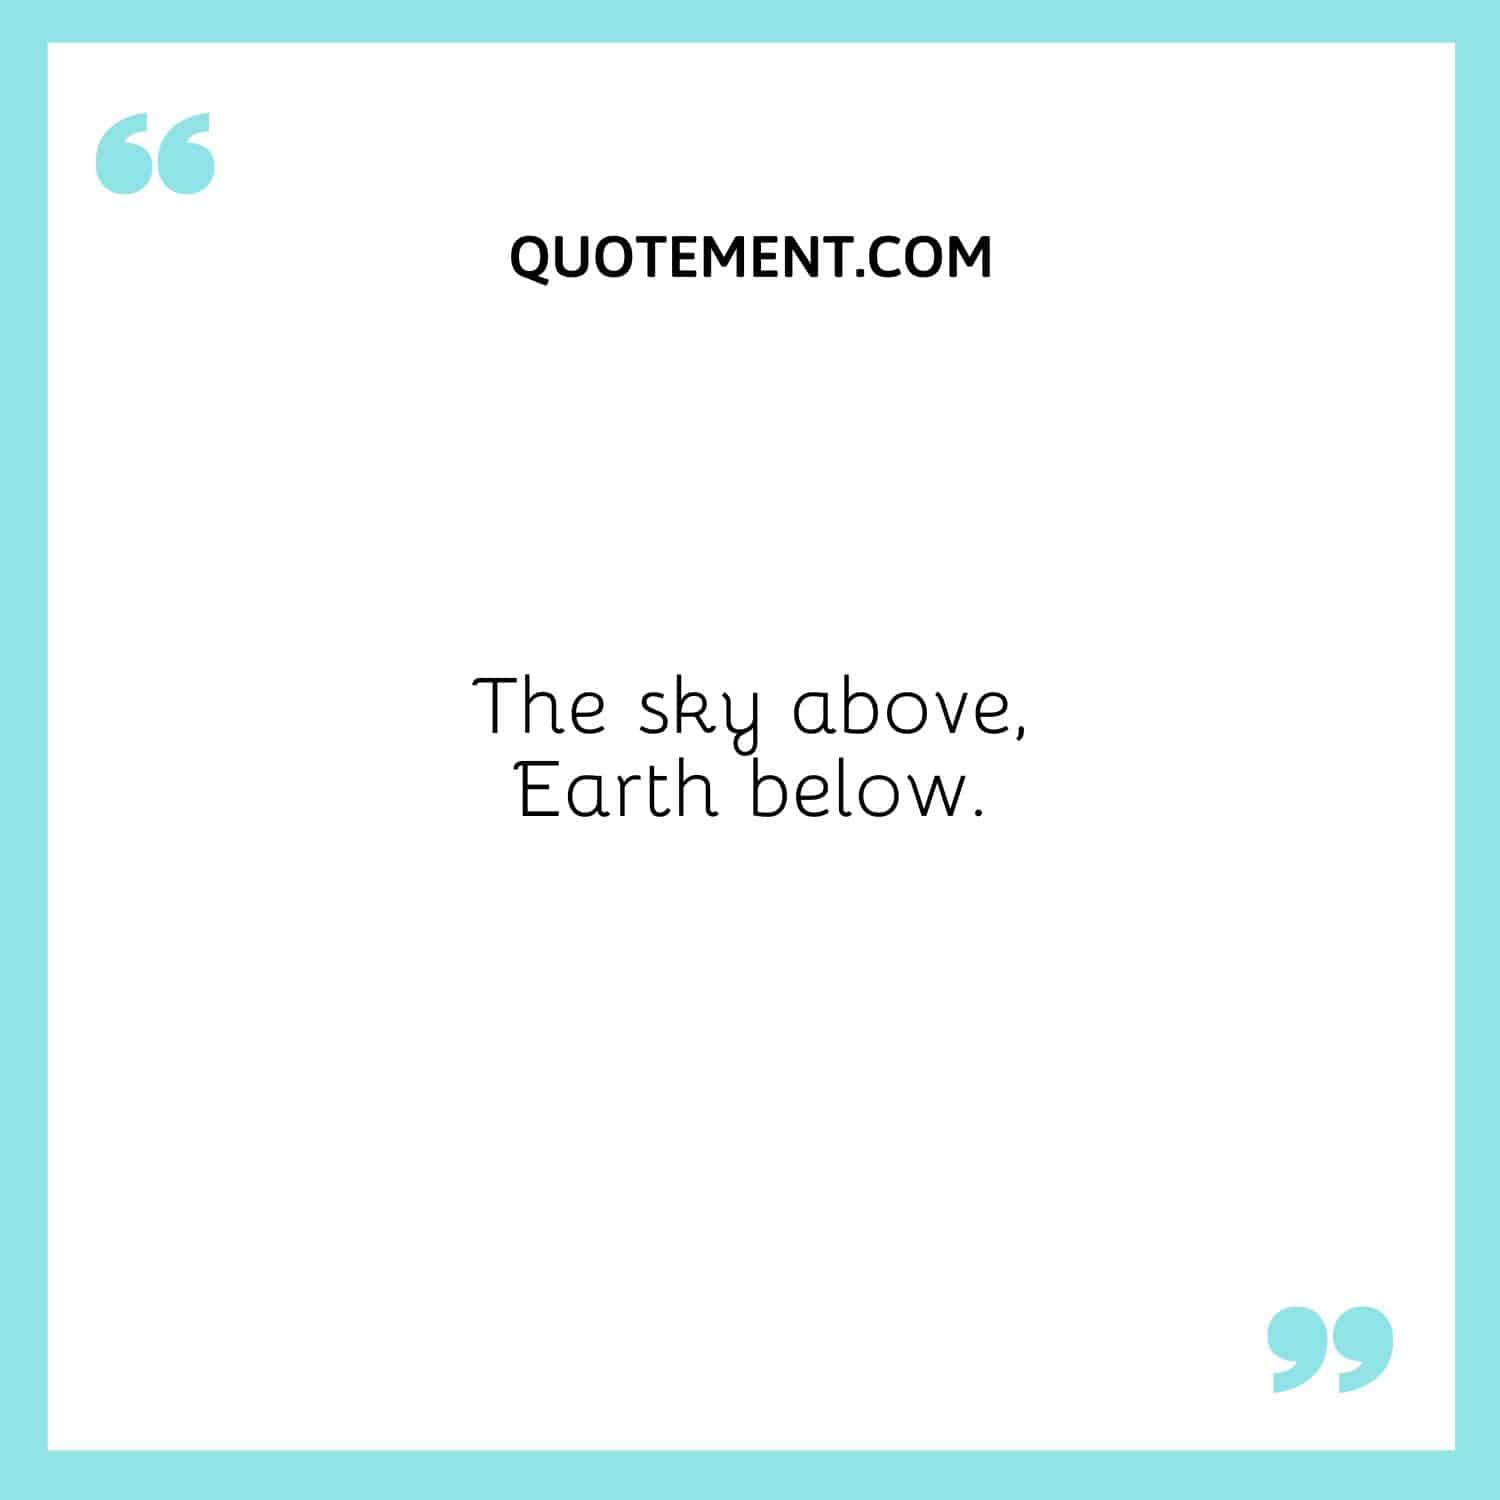 The sky above, Earth below.